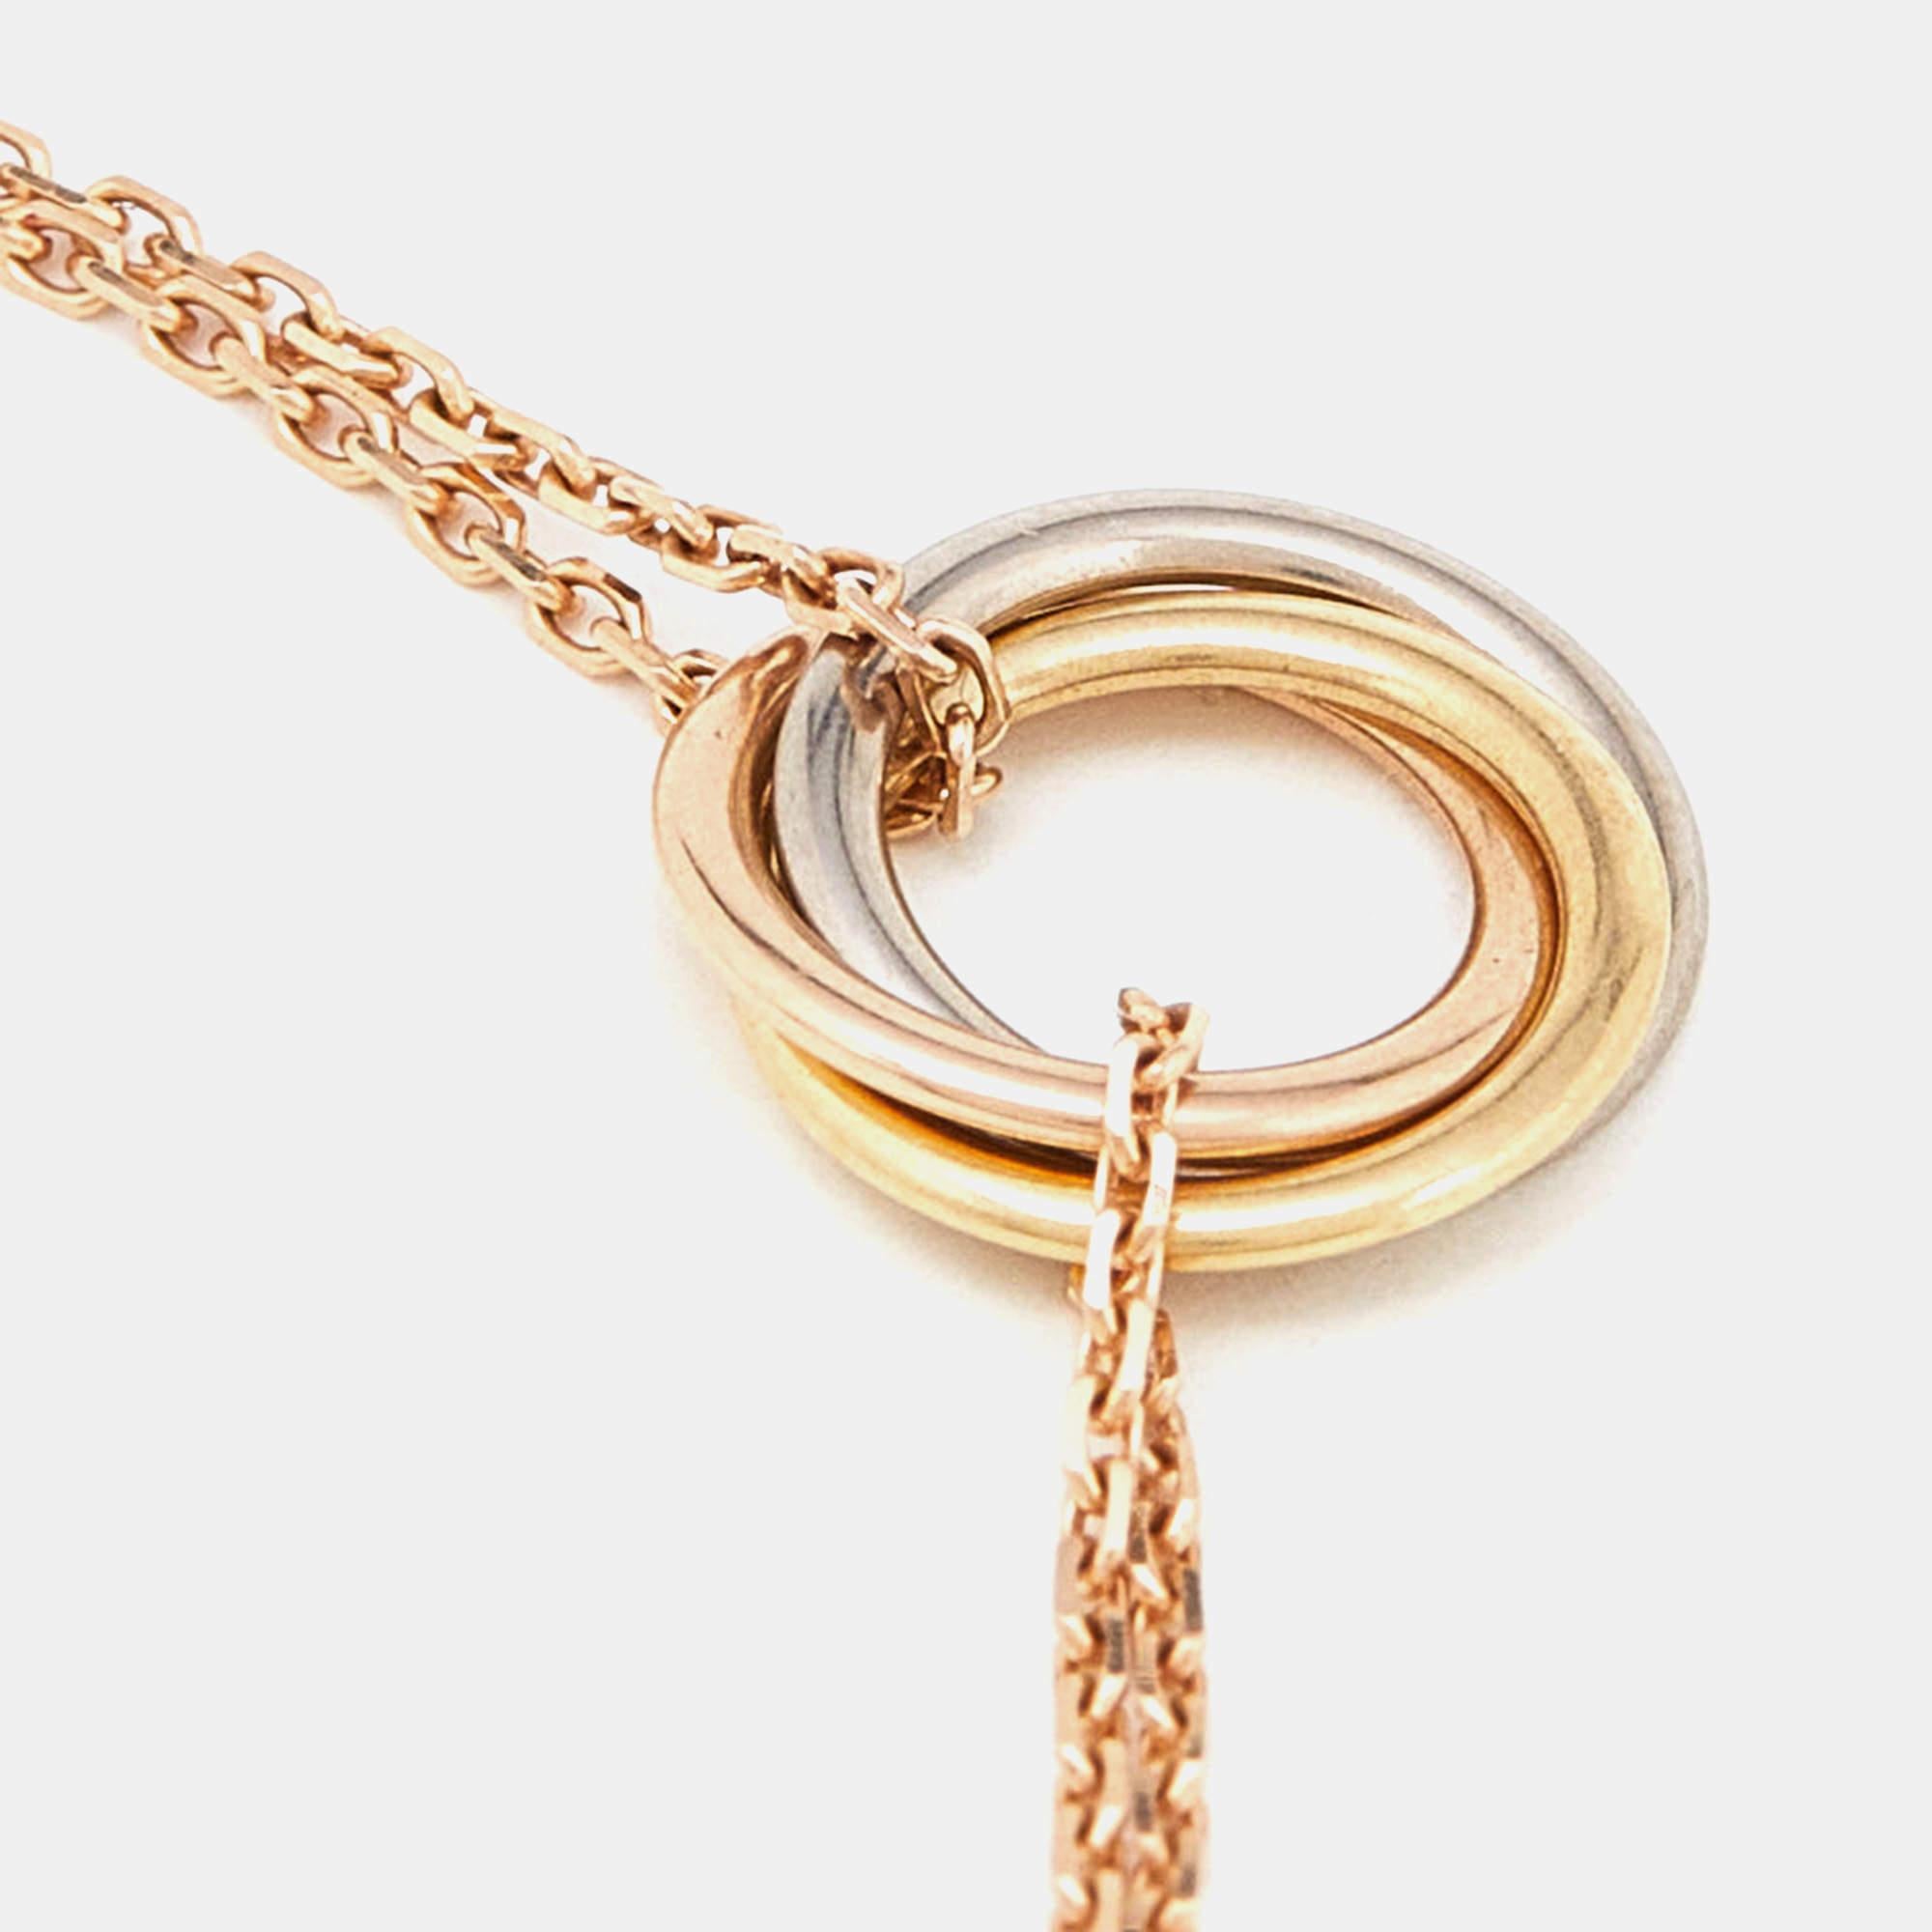 The Trinity de Cartier collection consists of pieces that are like one of those beautiful dreams you never want to break away from. Picked from that very line is this bracelet that comes in 18k gold with an assembly of subtle exquisiteness The slim